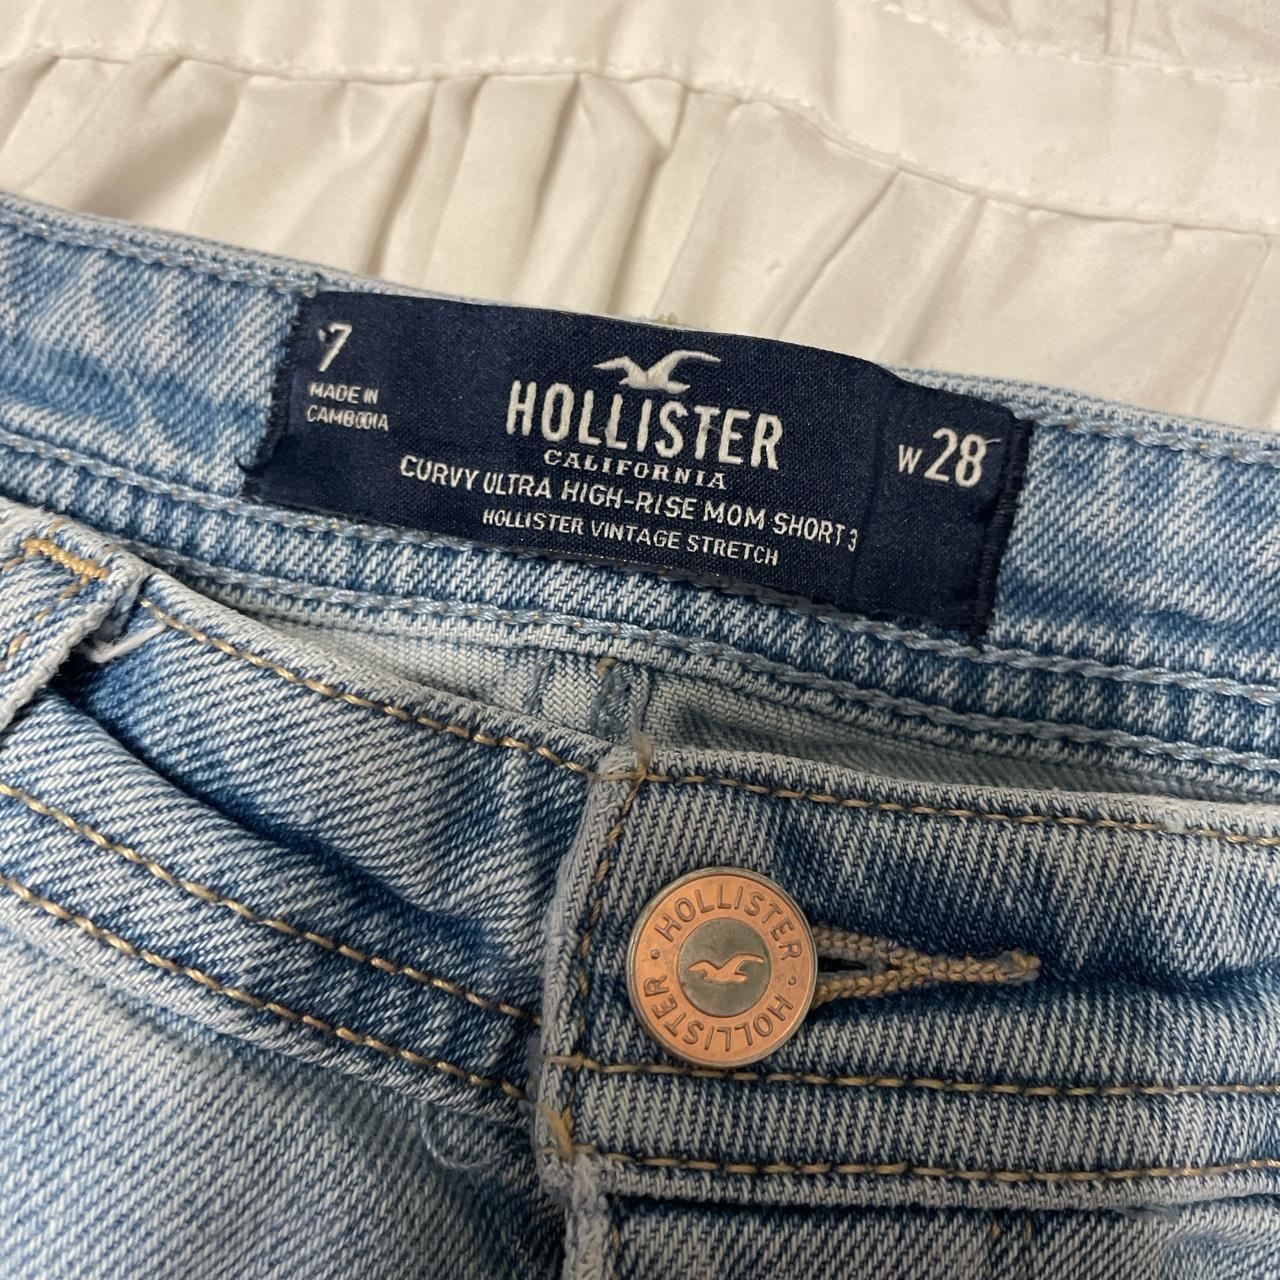 Hollister curvy ultra high rise mom jeans vintage stretch size 7R